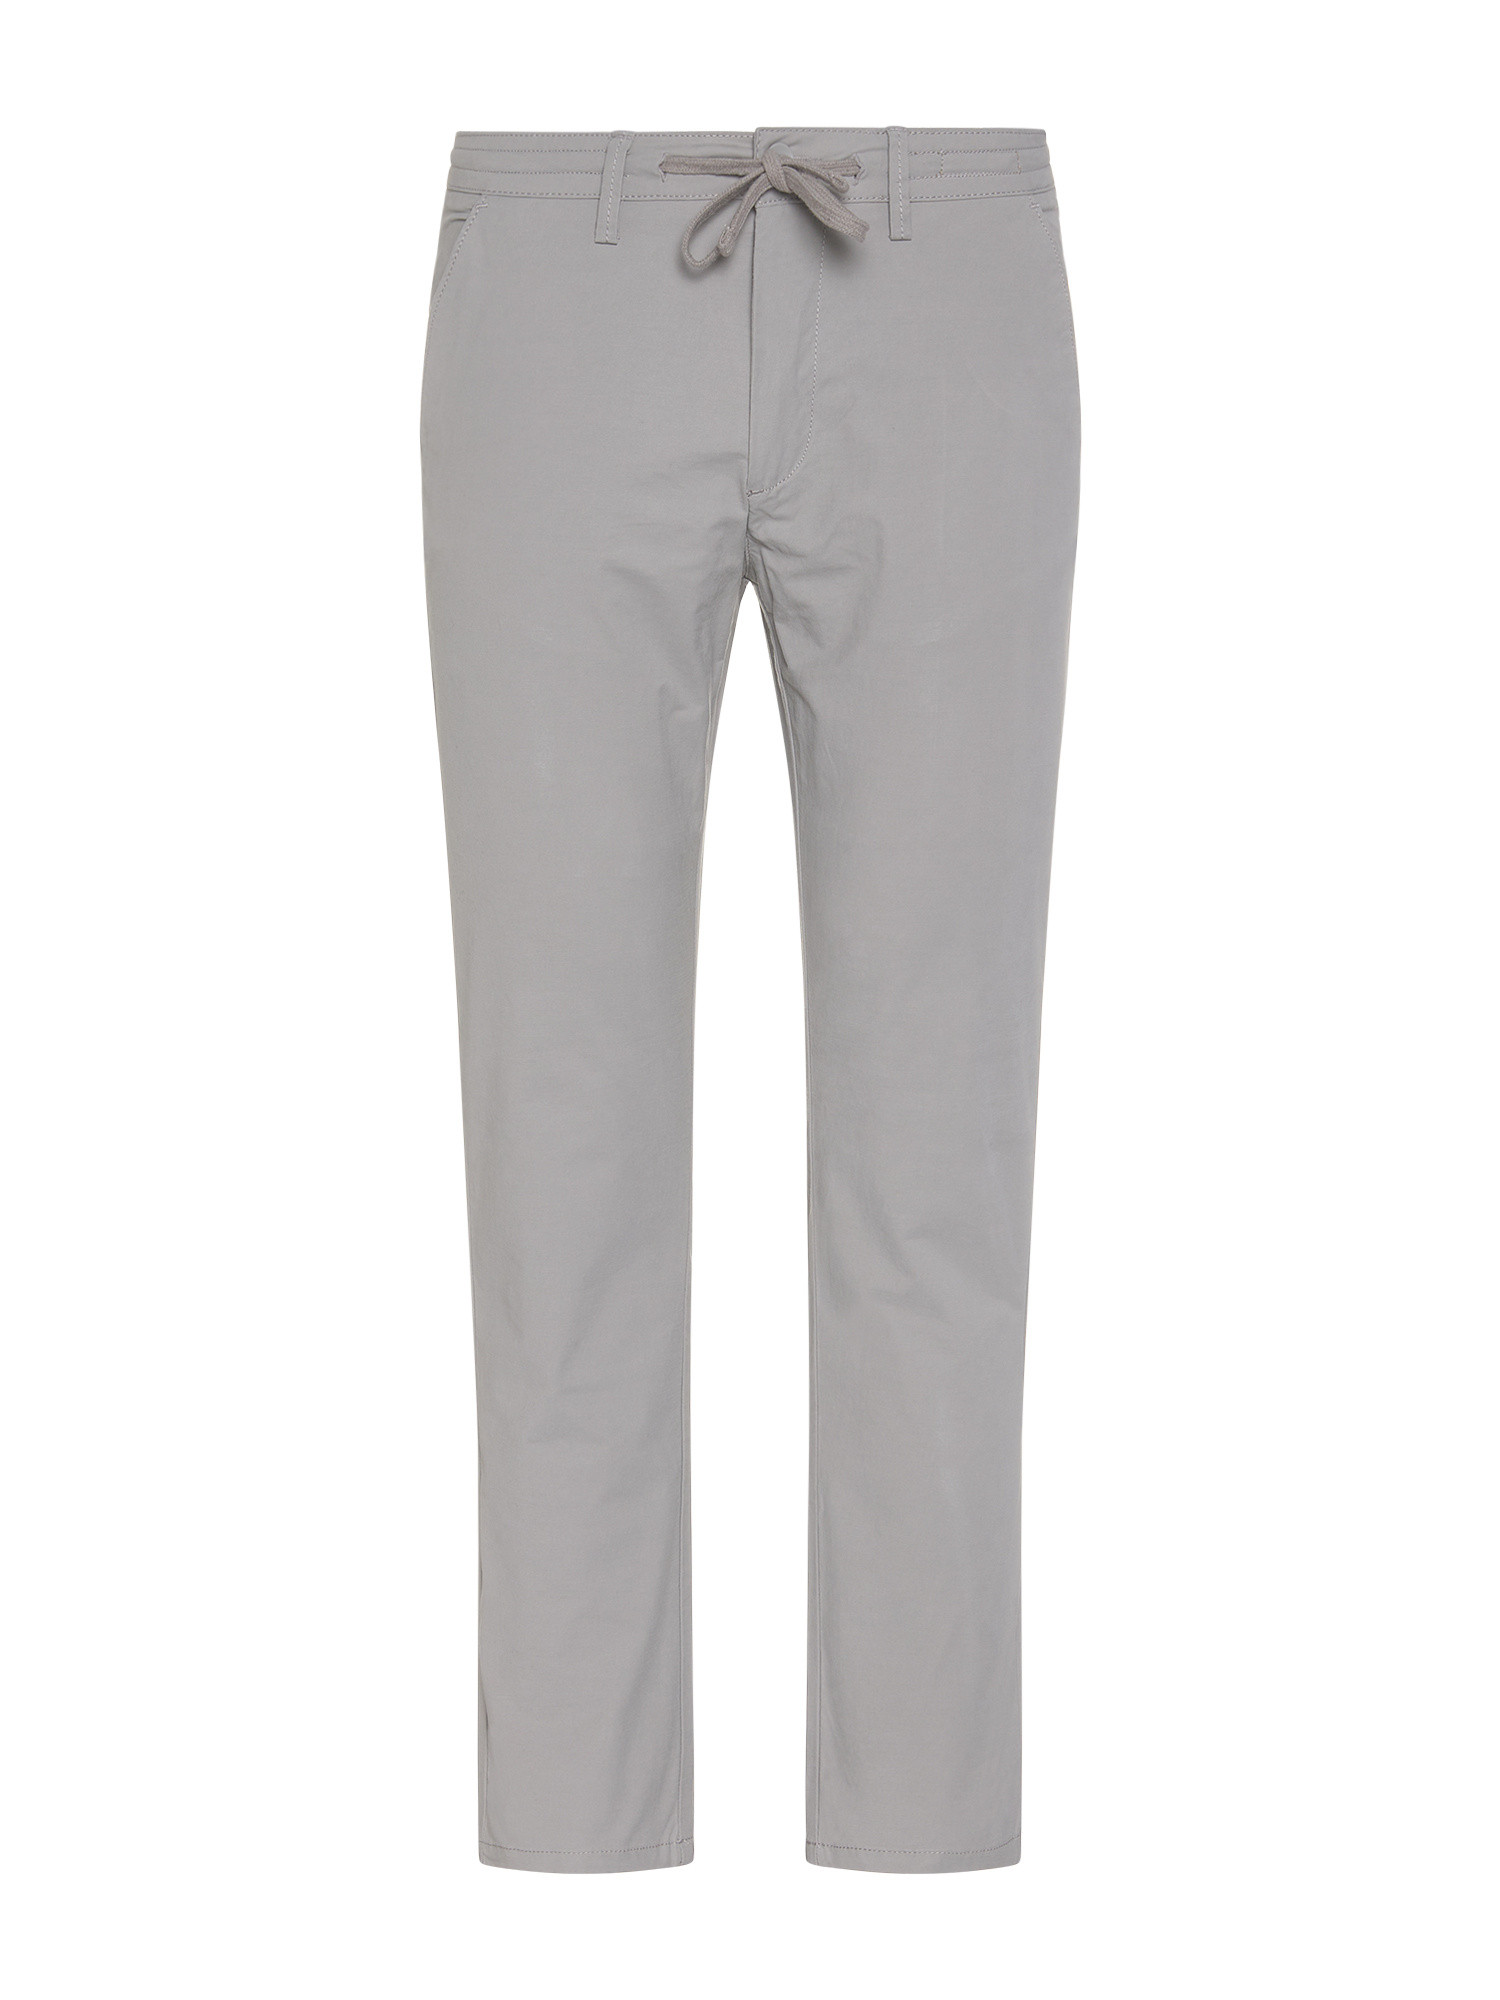 JCT - Slim fit chino jogger, Grey, large image number 0